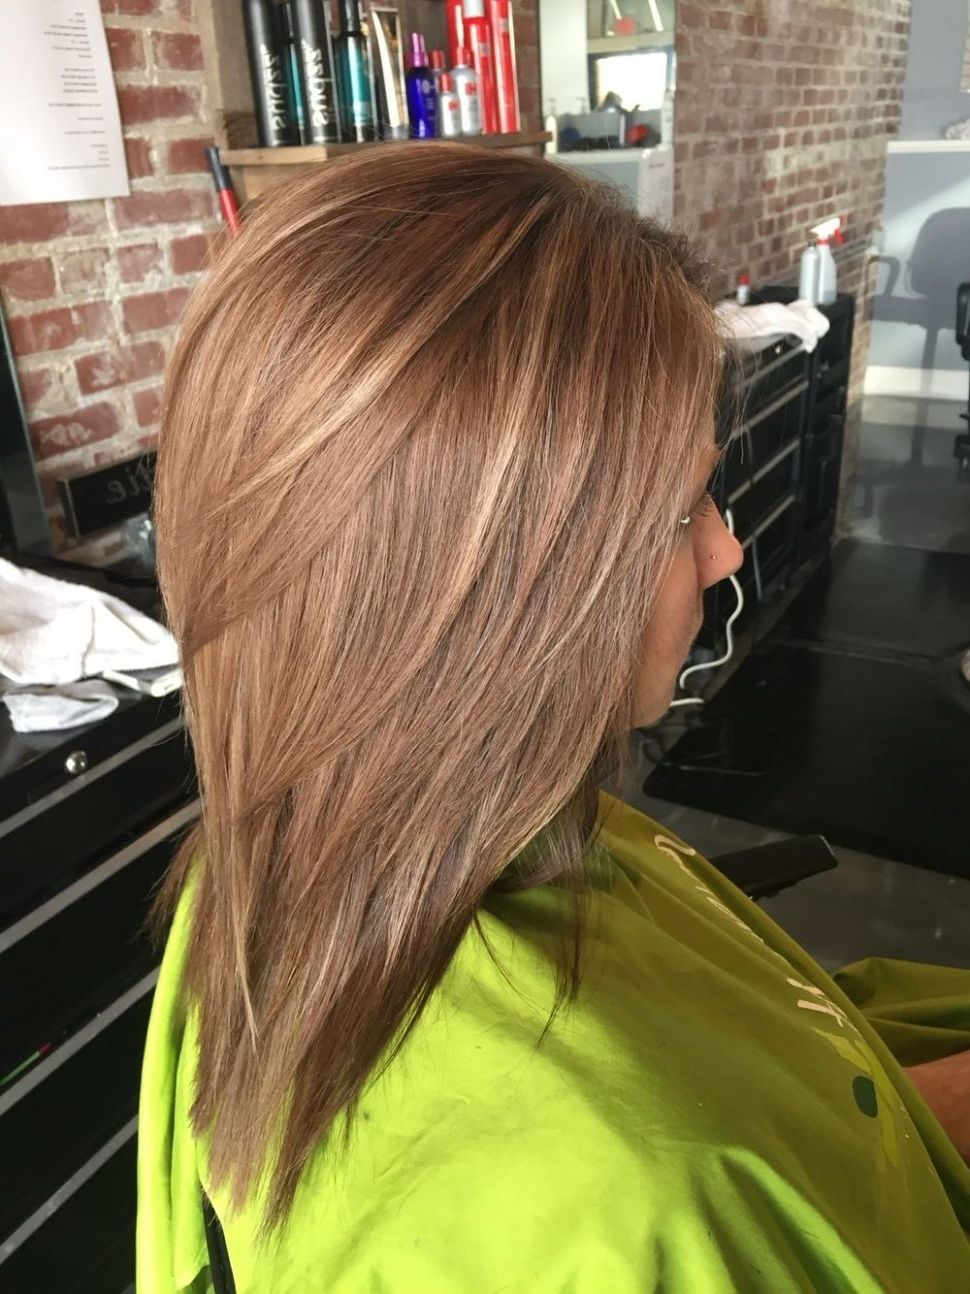 Hair Color : Brown Hair With Blonde Highlights Wig Light Bob Dark Within Most Up To Date Curly Highlighted Blonde Bob Hairstyles (View 15 of 20)